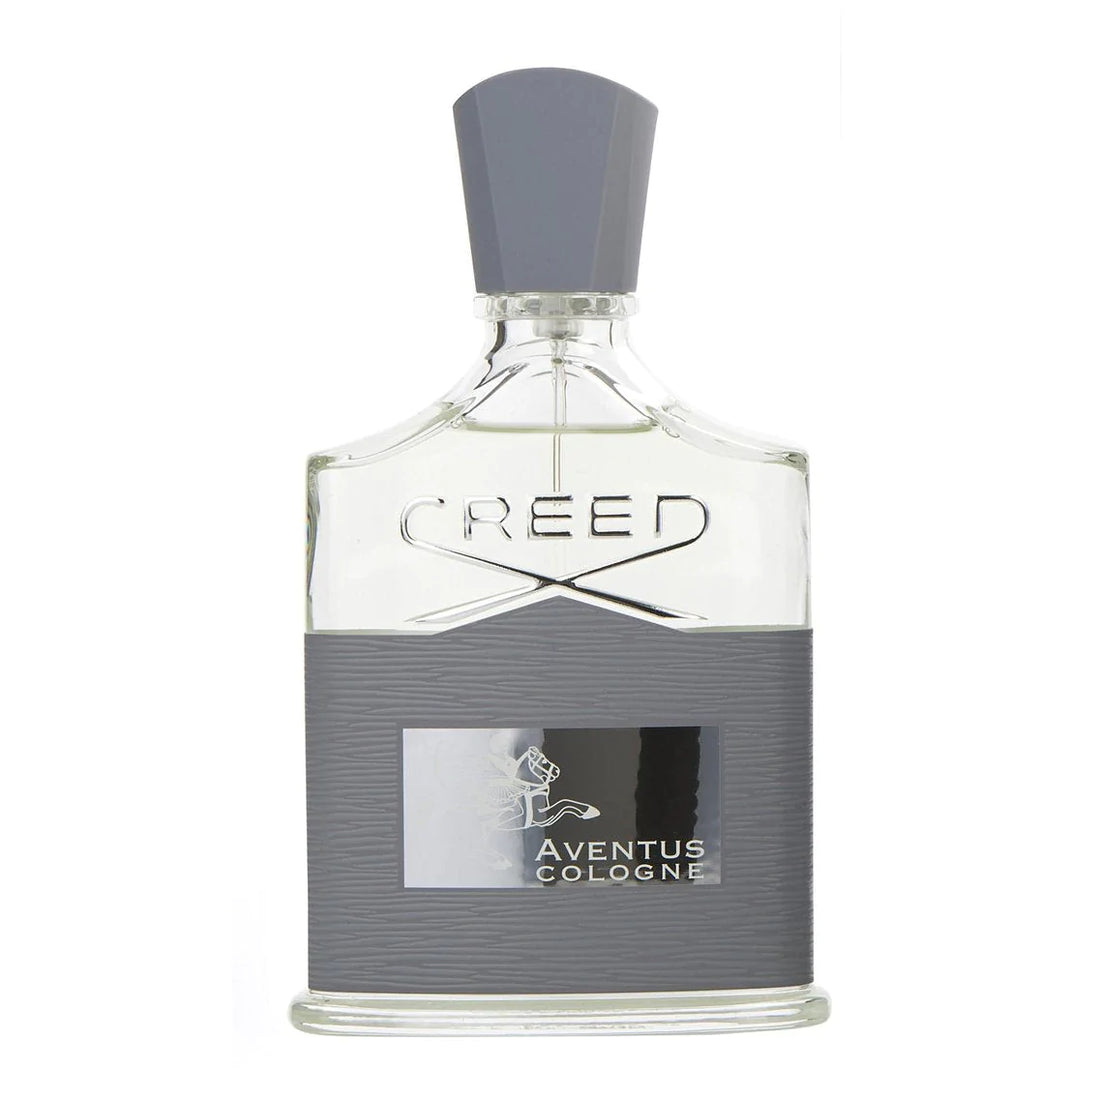 Creed Aventus Cologne Samples